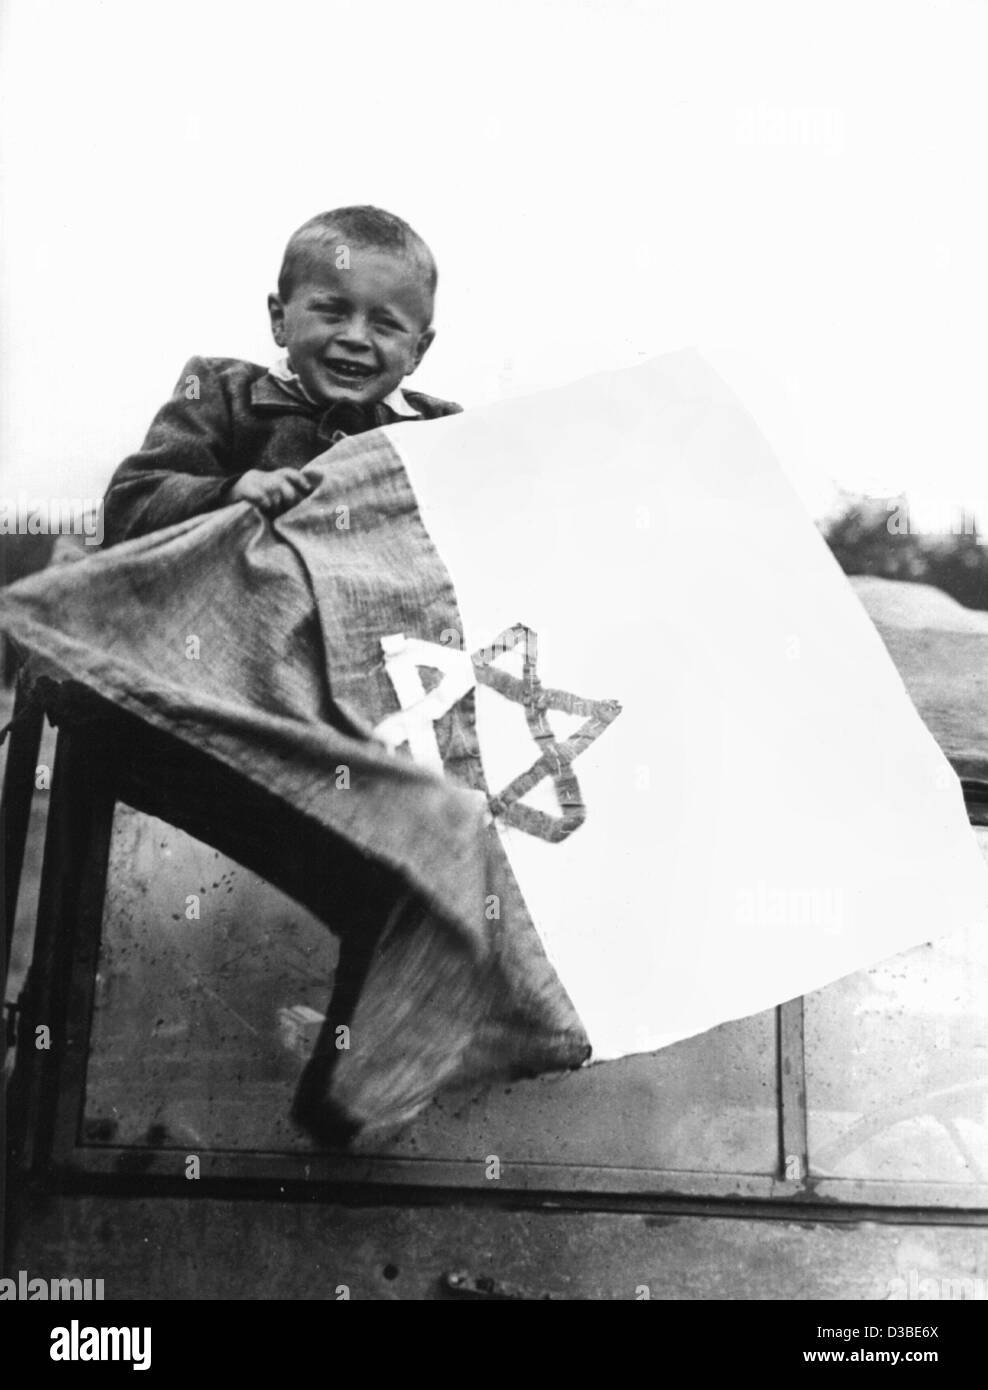 (dpa files) - A little boy holds a self-made flag with the Star of David after the liberation of the Buchenwald concentration camp, Germany, April 1945. Buchenwald was one of the largest concentration camps in Nazi Germany, established in July 1937 five miles north of Weimar. Stock Photo